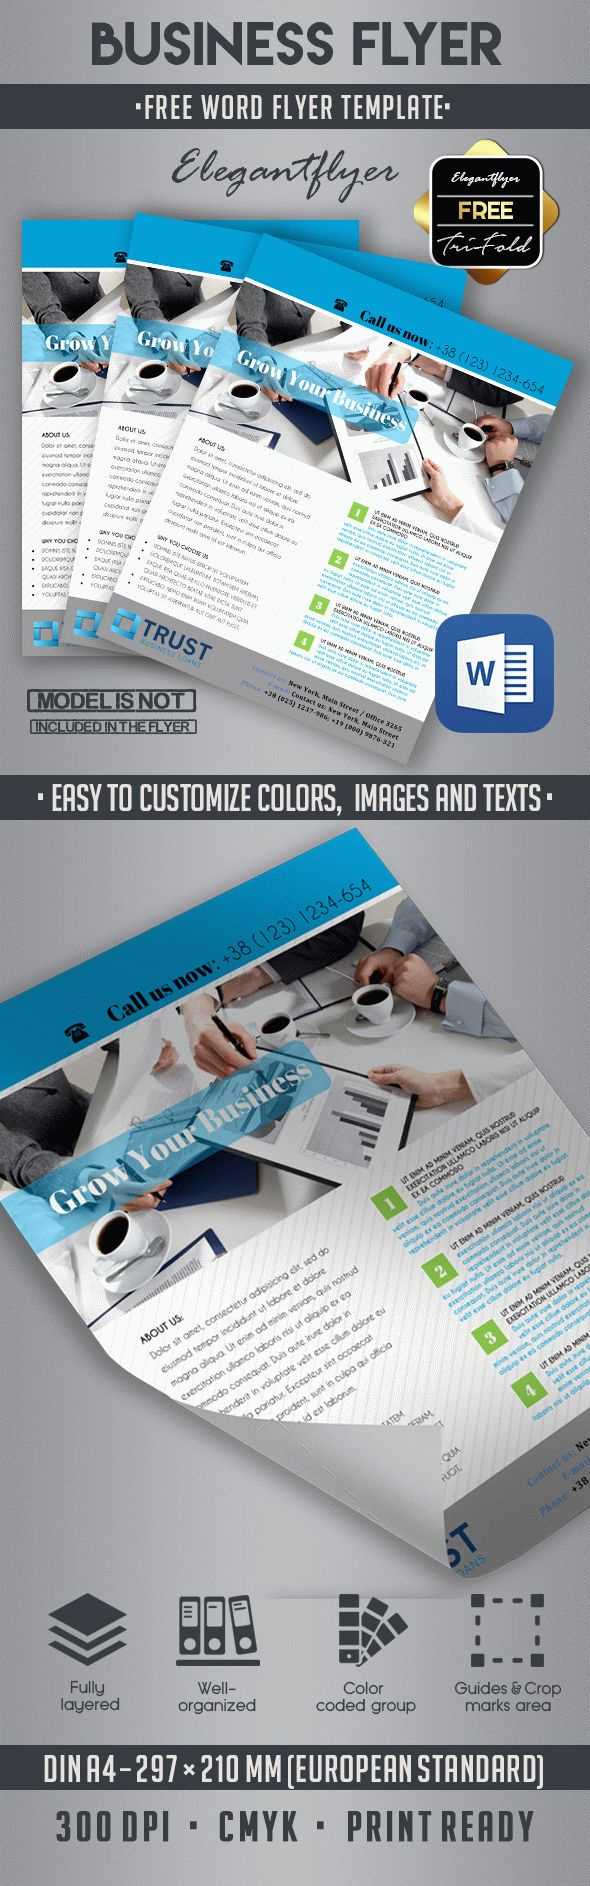 10 Best Business Flyer Templates In Word! |Elegantflyer Intended For Free Business Flyer Templates For Microsoft Word